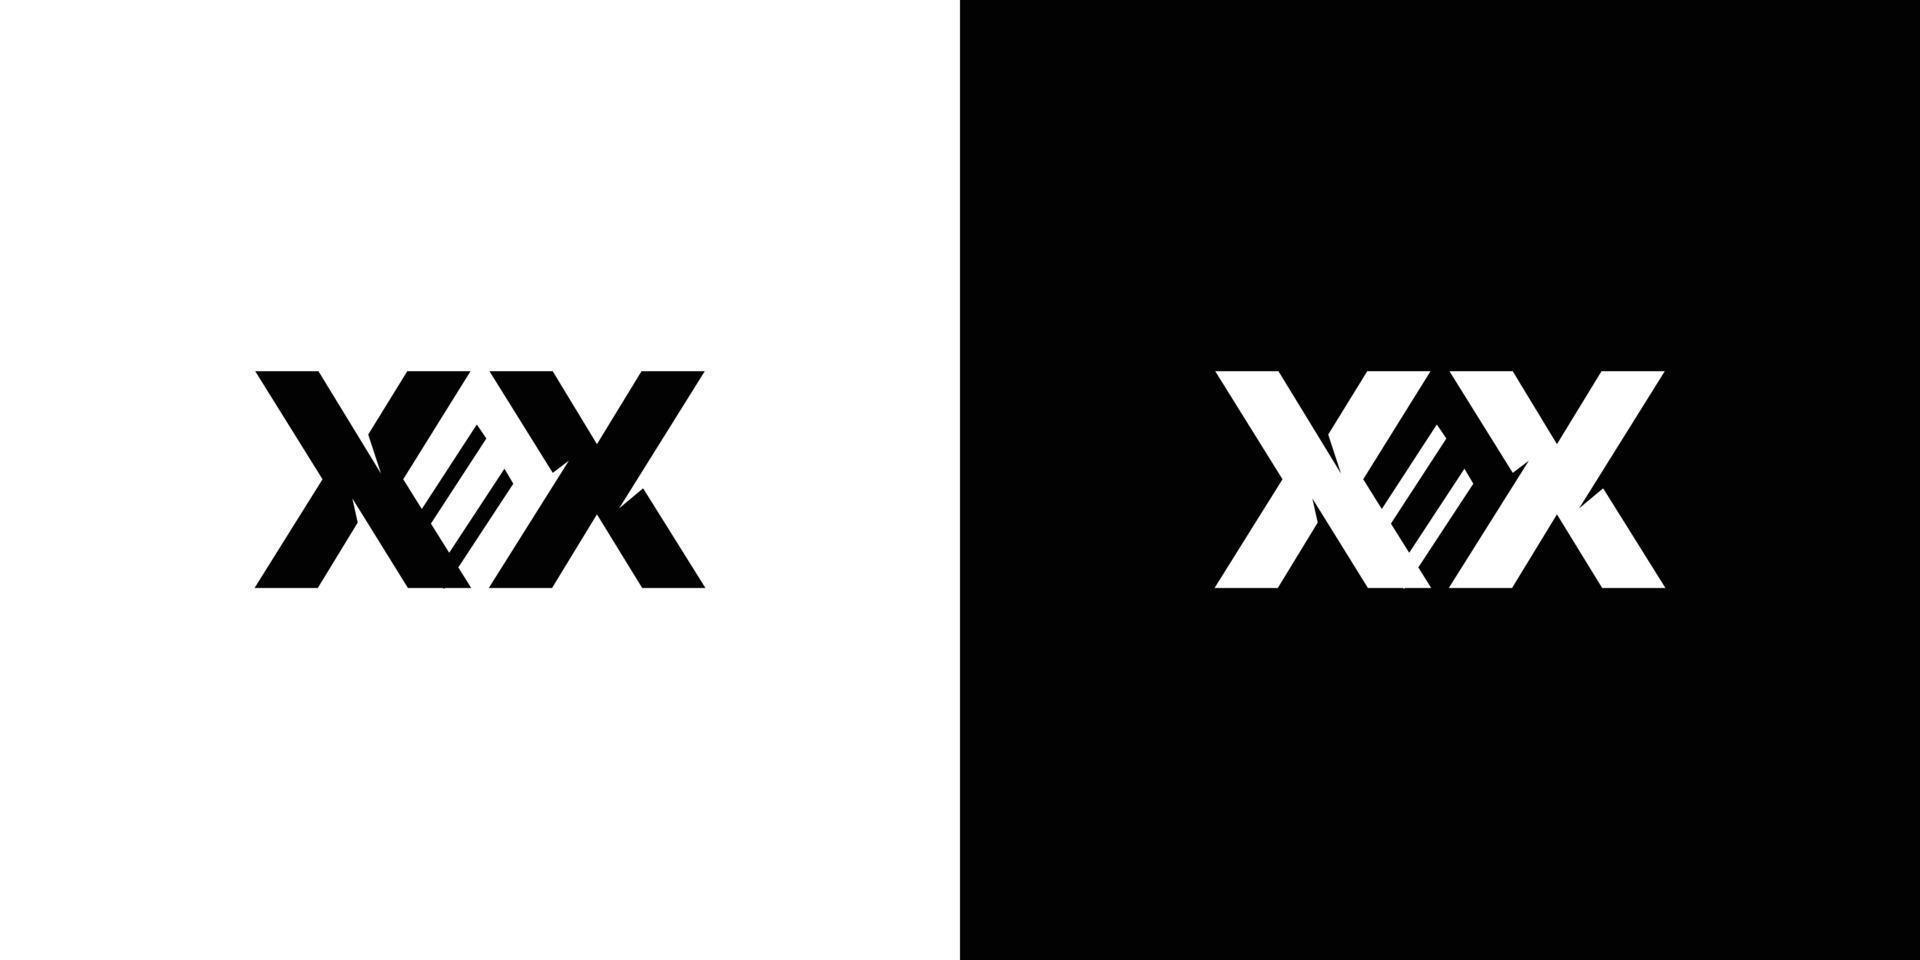 The initial letter XX logo design forms a modern and professional number 3 vector